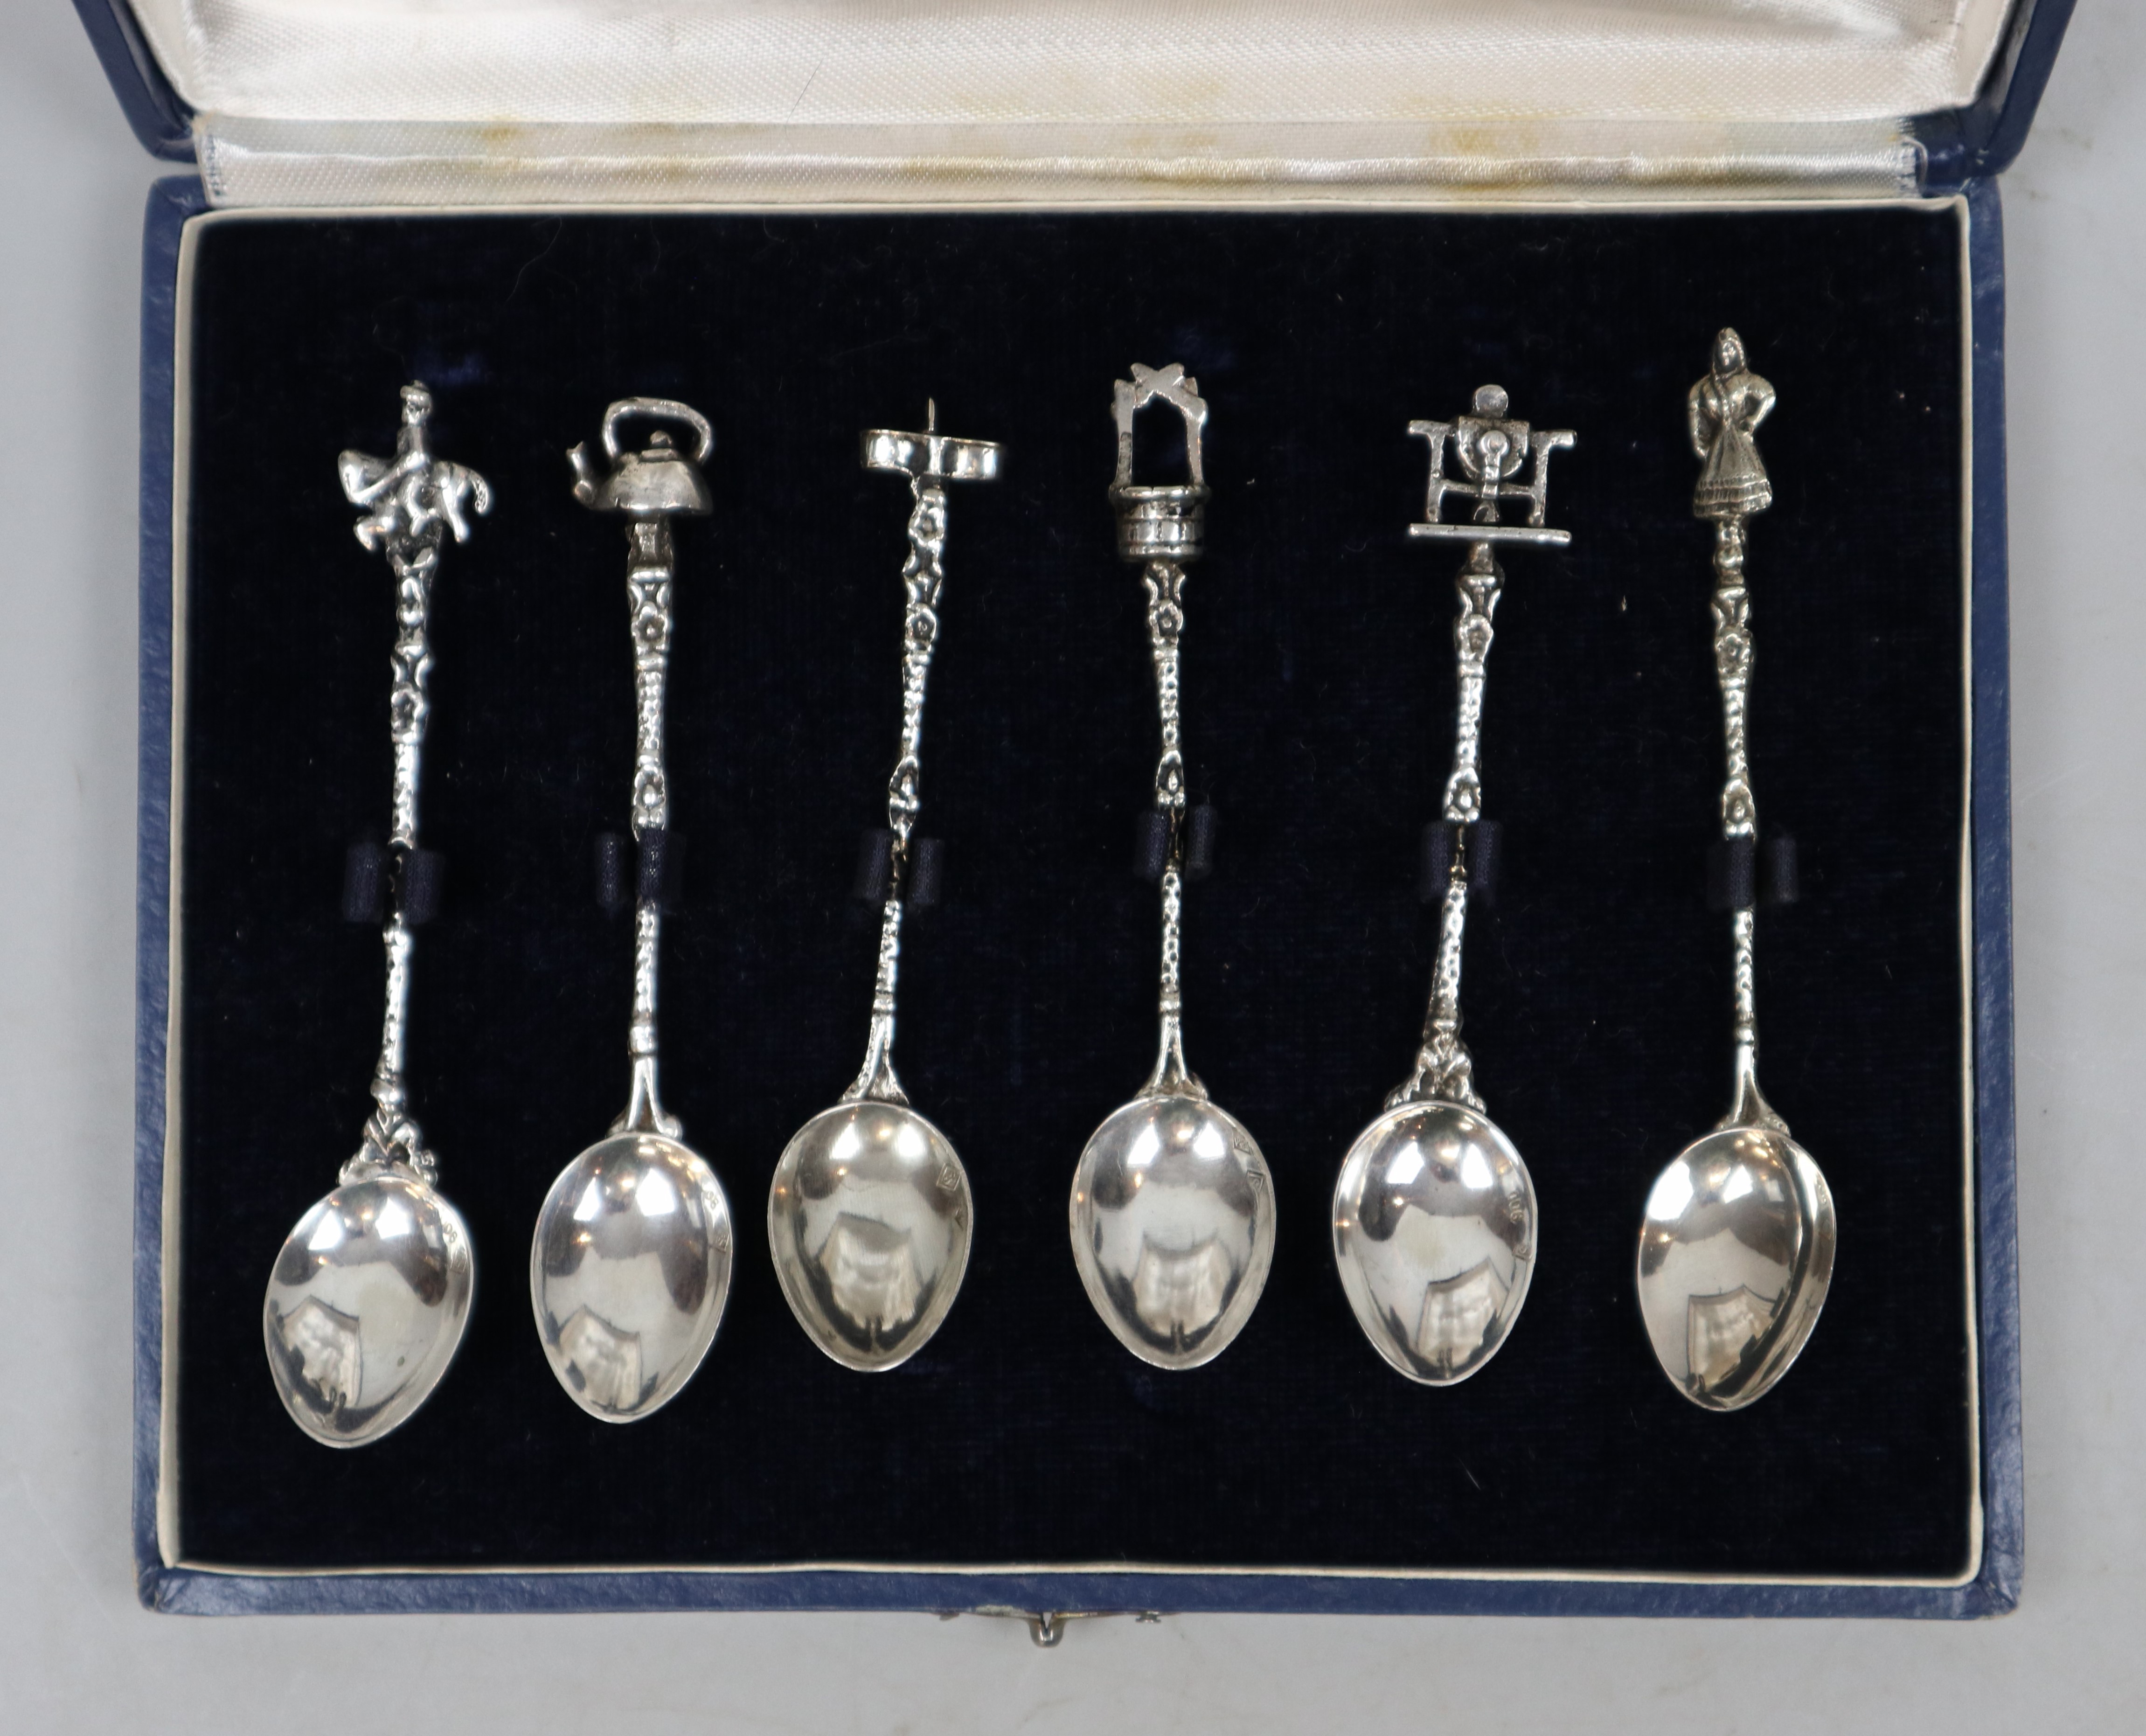 Cased set of silver teaspoons marked 900 - Approx weight 47g - Image 2 of 2